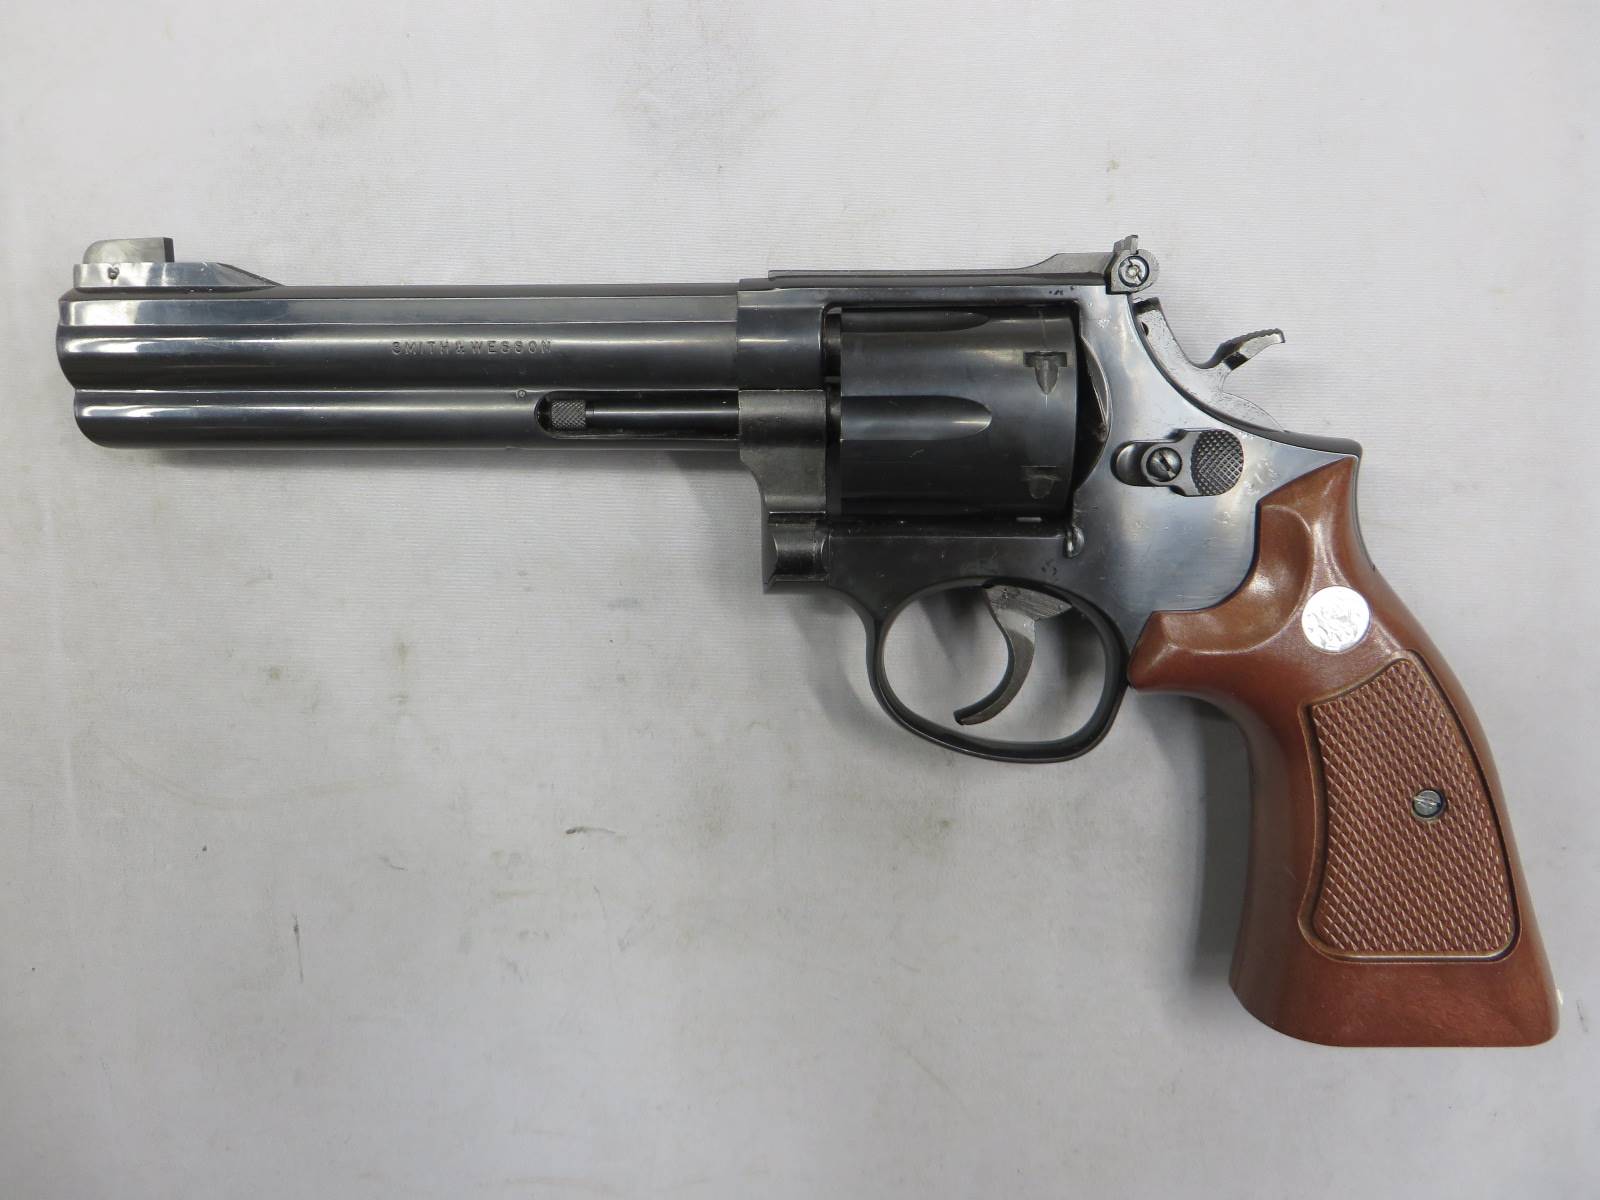 【MGC】S&W M586 6in モデルガン